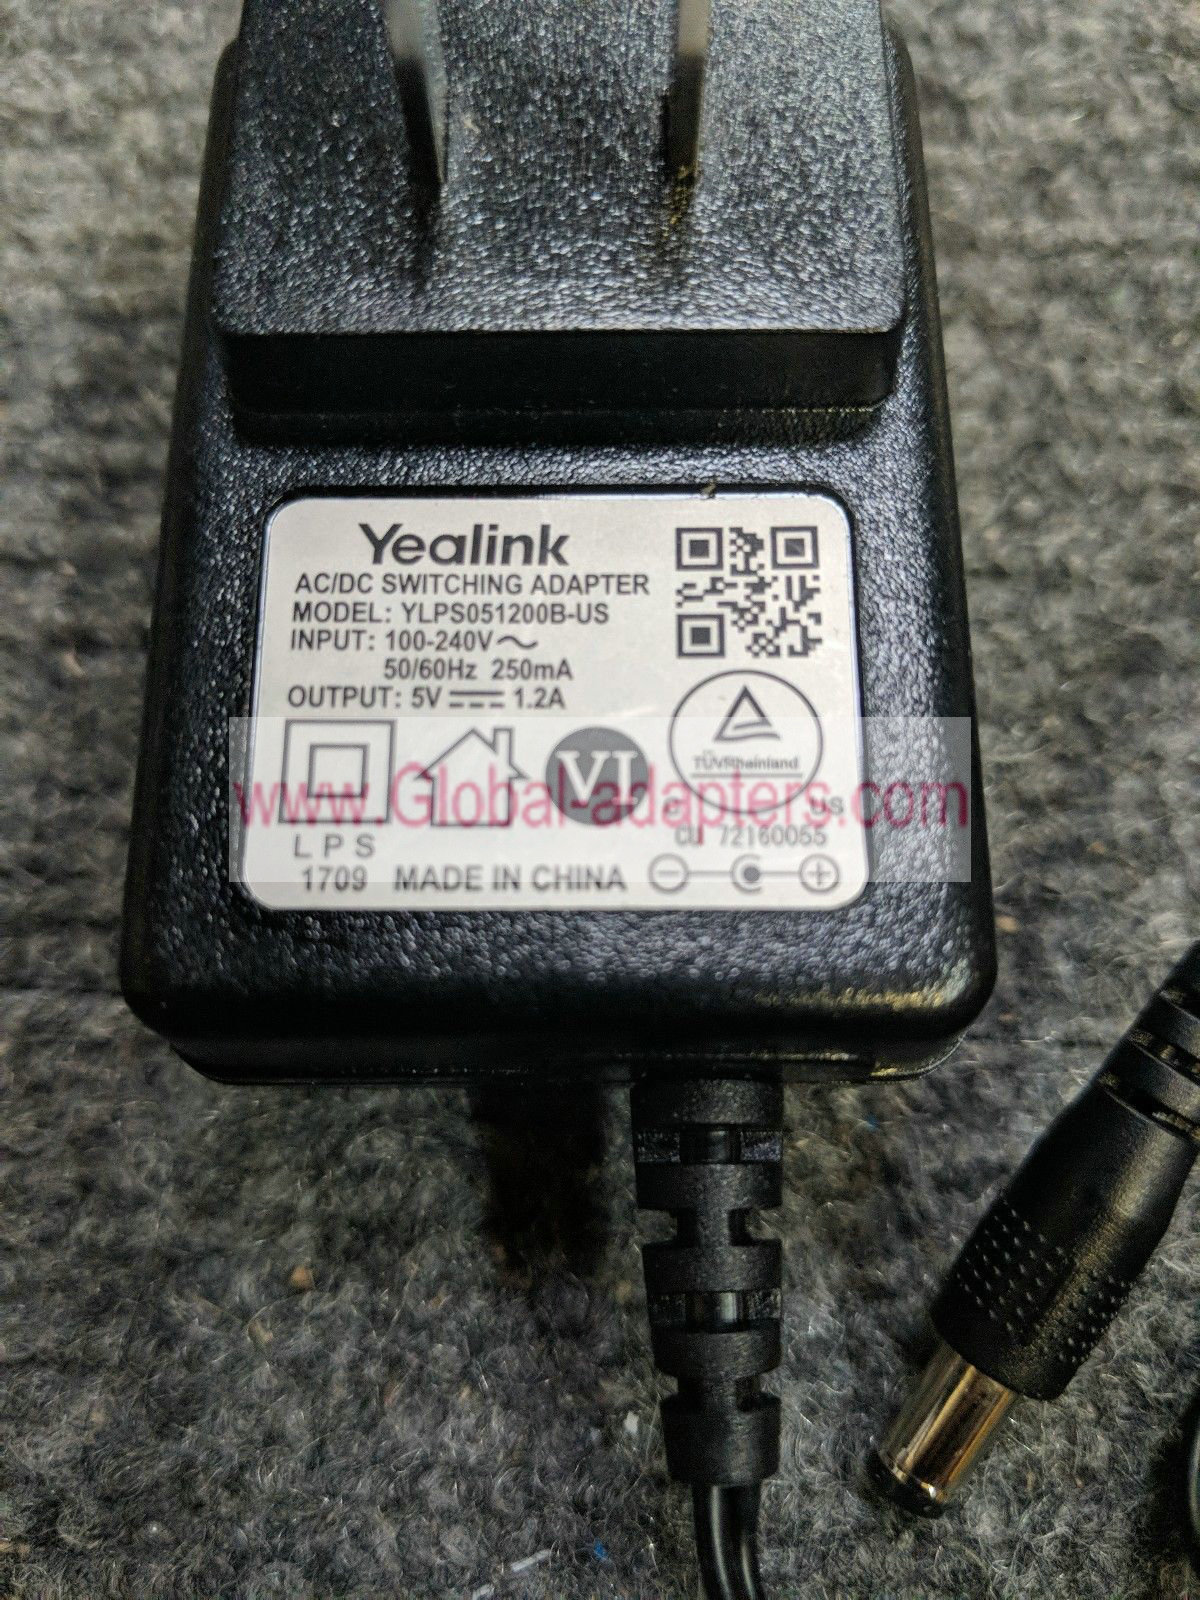 Brand new Yealink 5V 1.2A YLPS051200B-US Switching Power Adapter